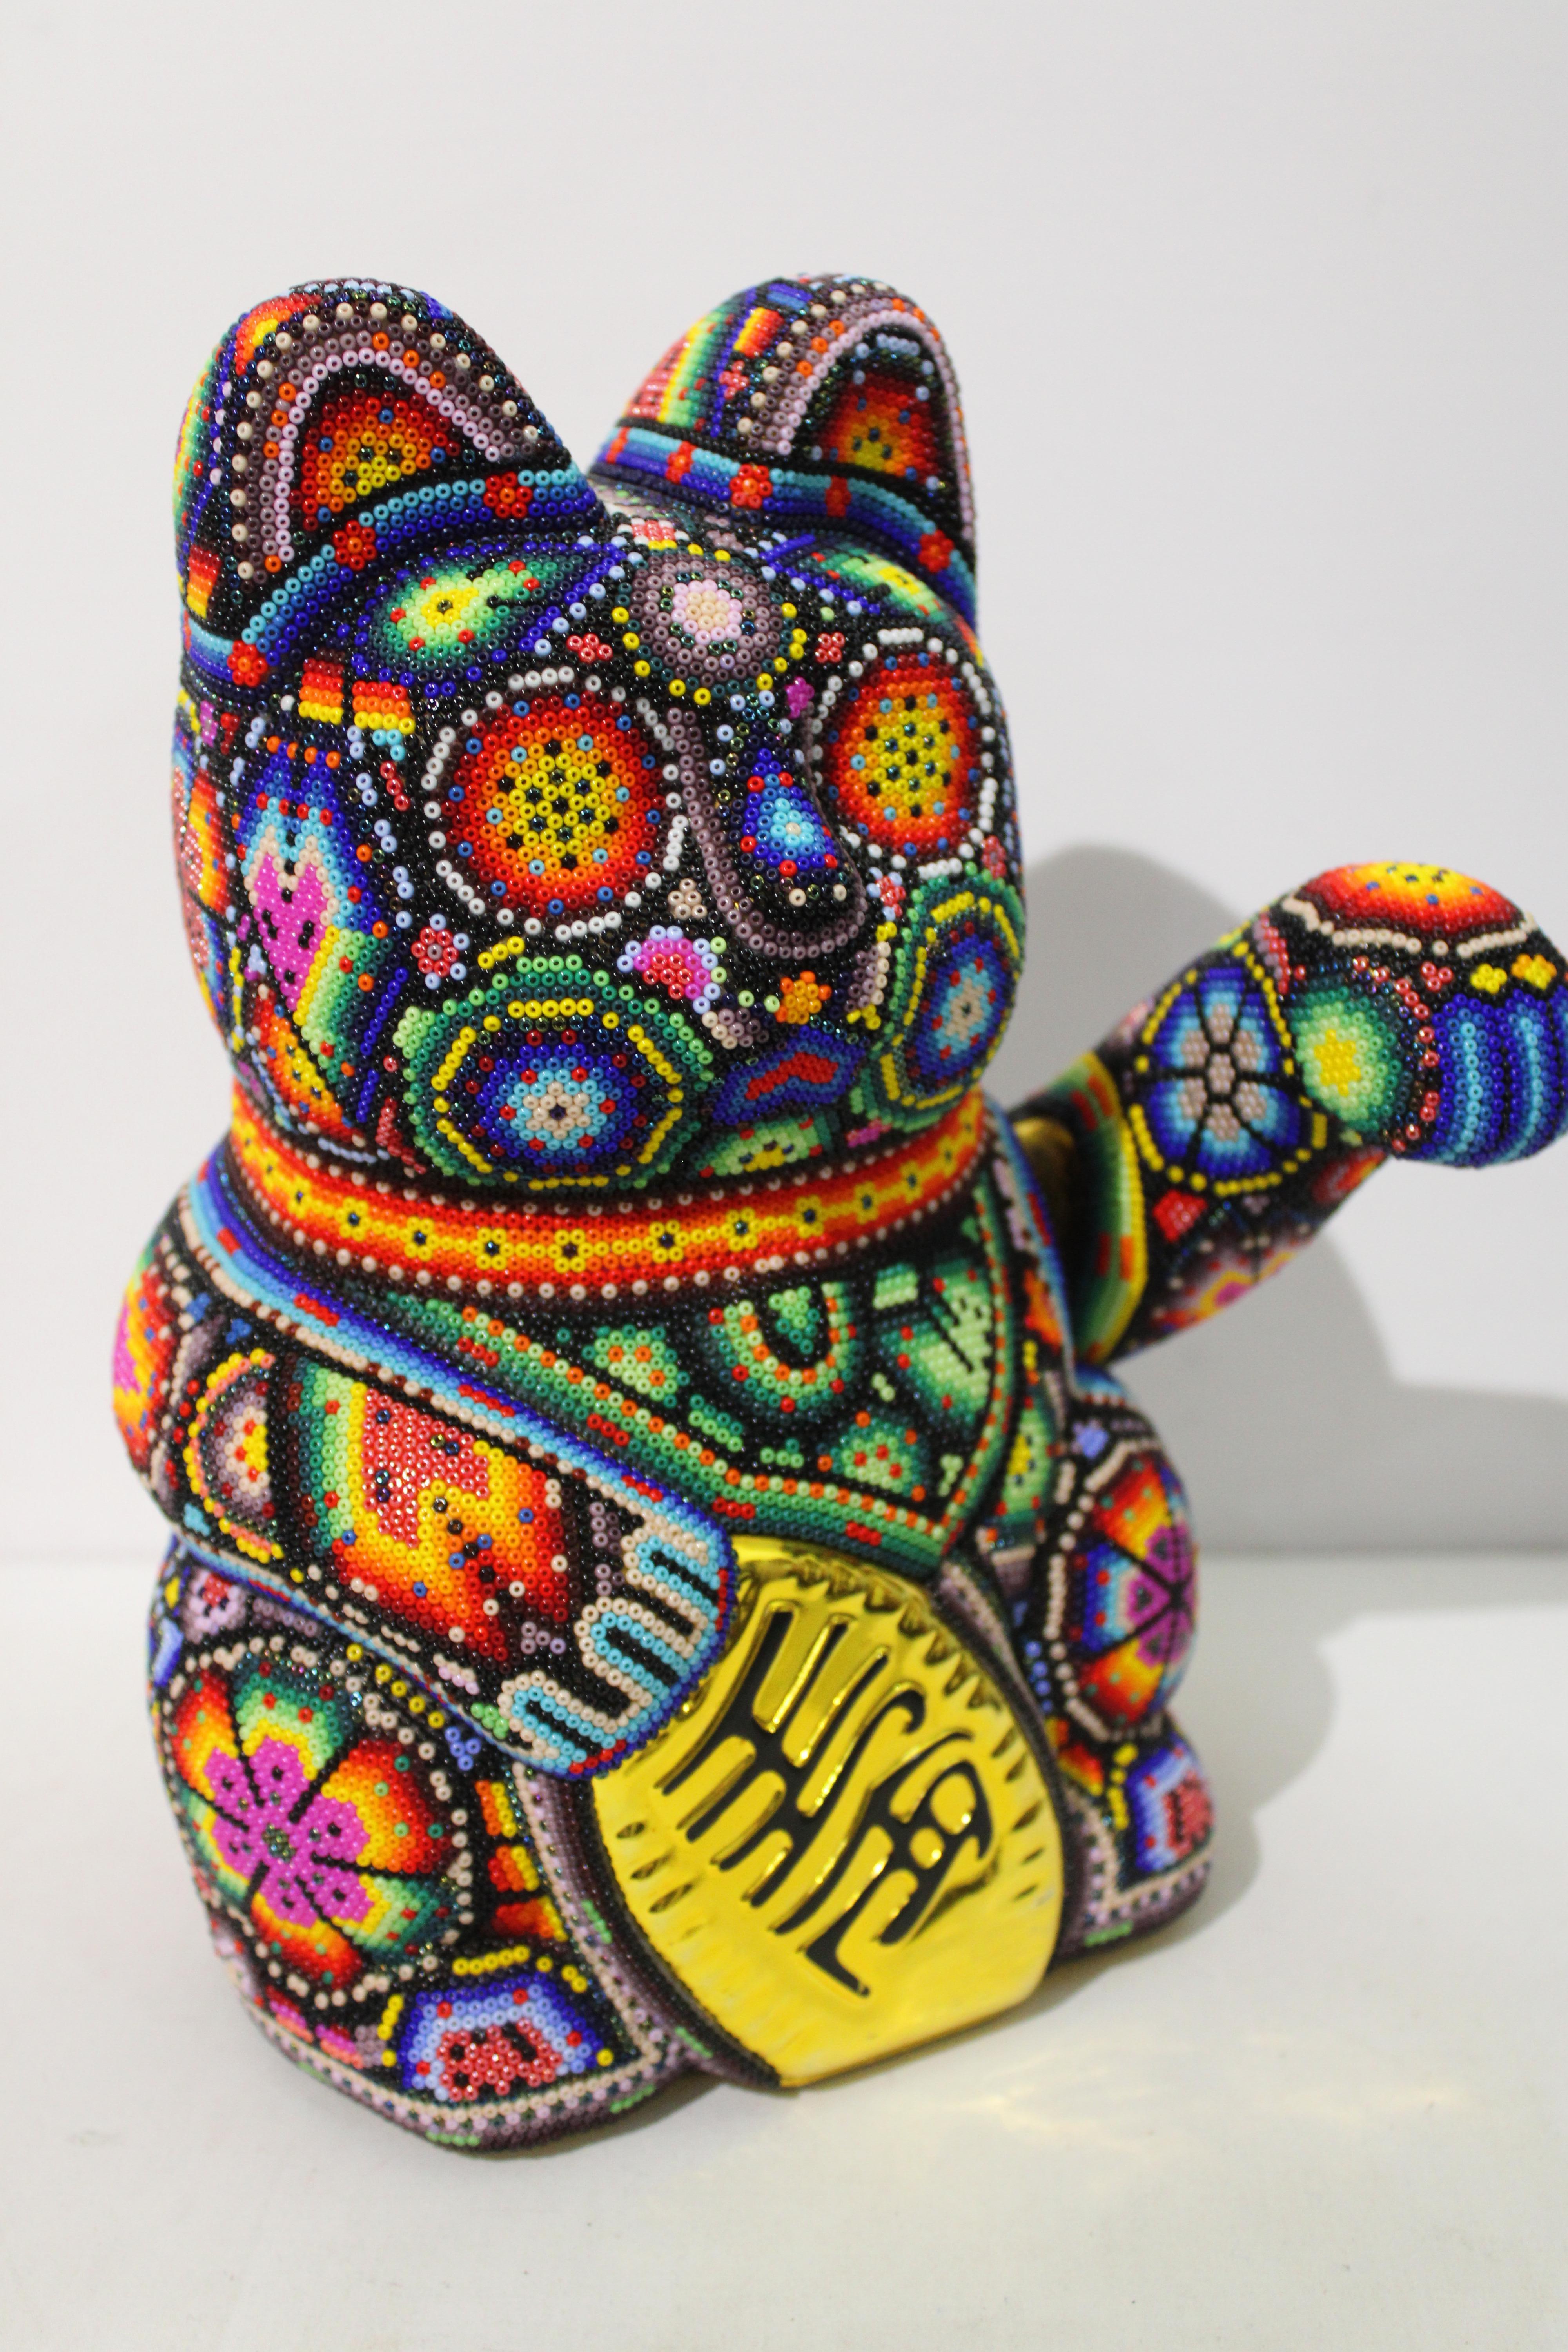 CHROMA aka Rick Wolfryd  Abstract Sculpture - Money Cat from Huichol ALTERATIONS Series